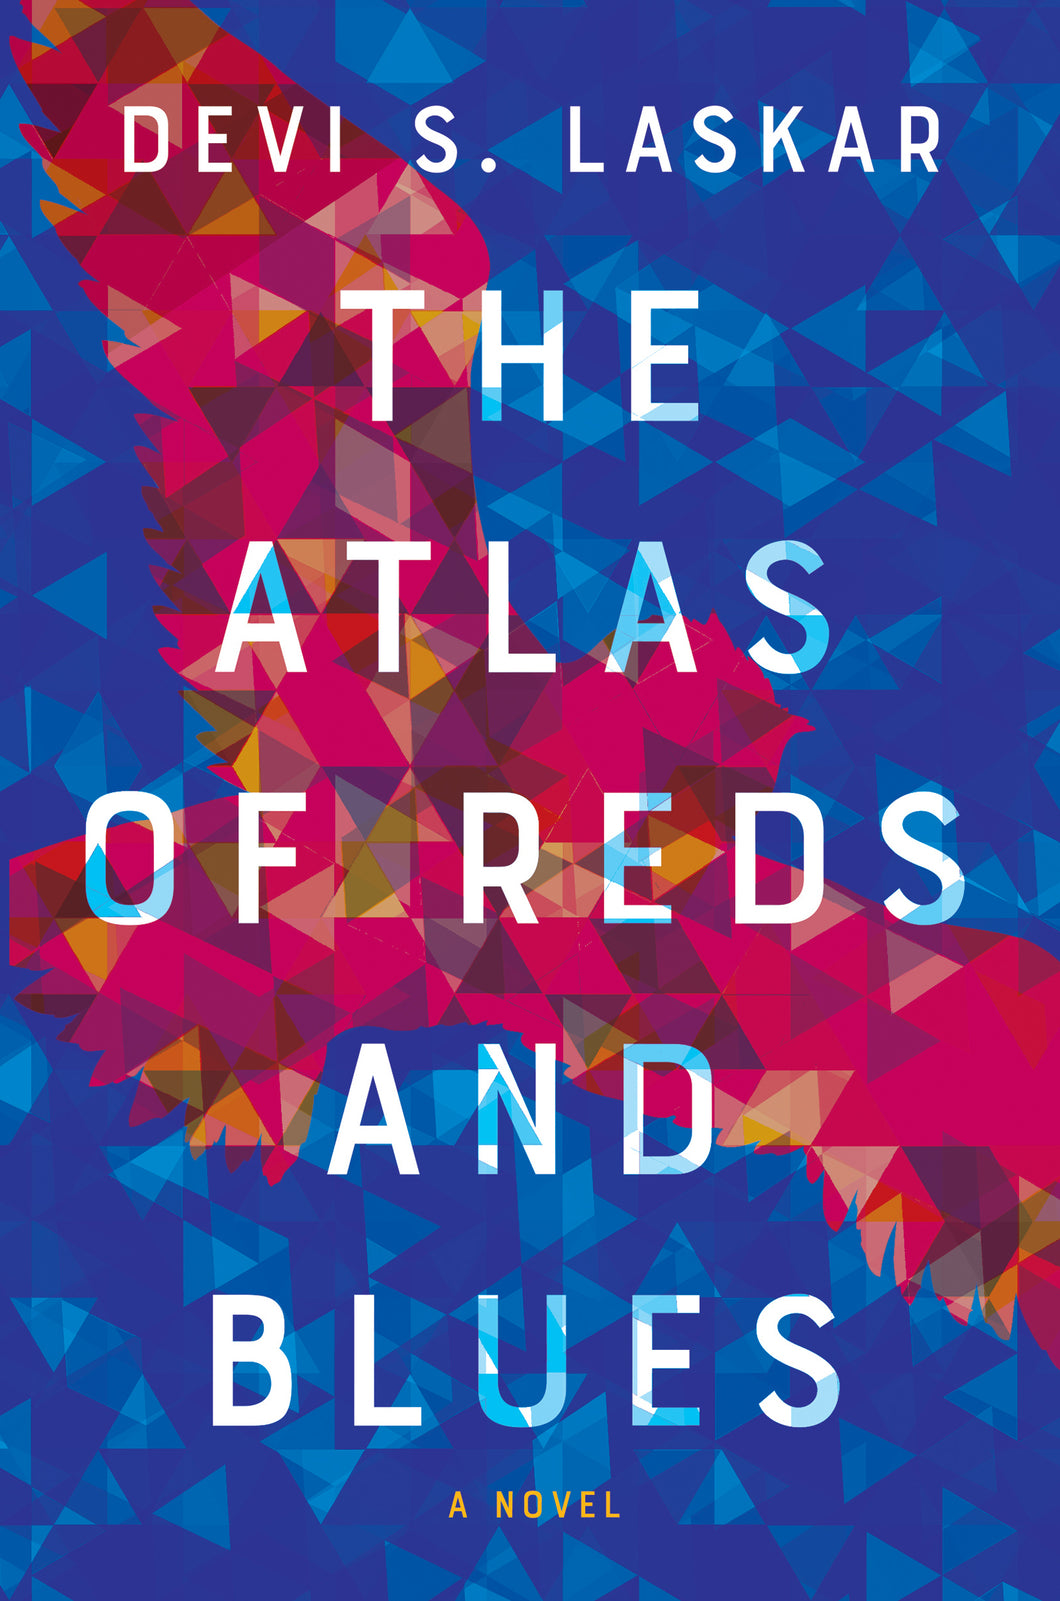 The Atlas of Reds and Blues by Devi S. Laskar